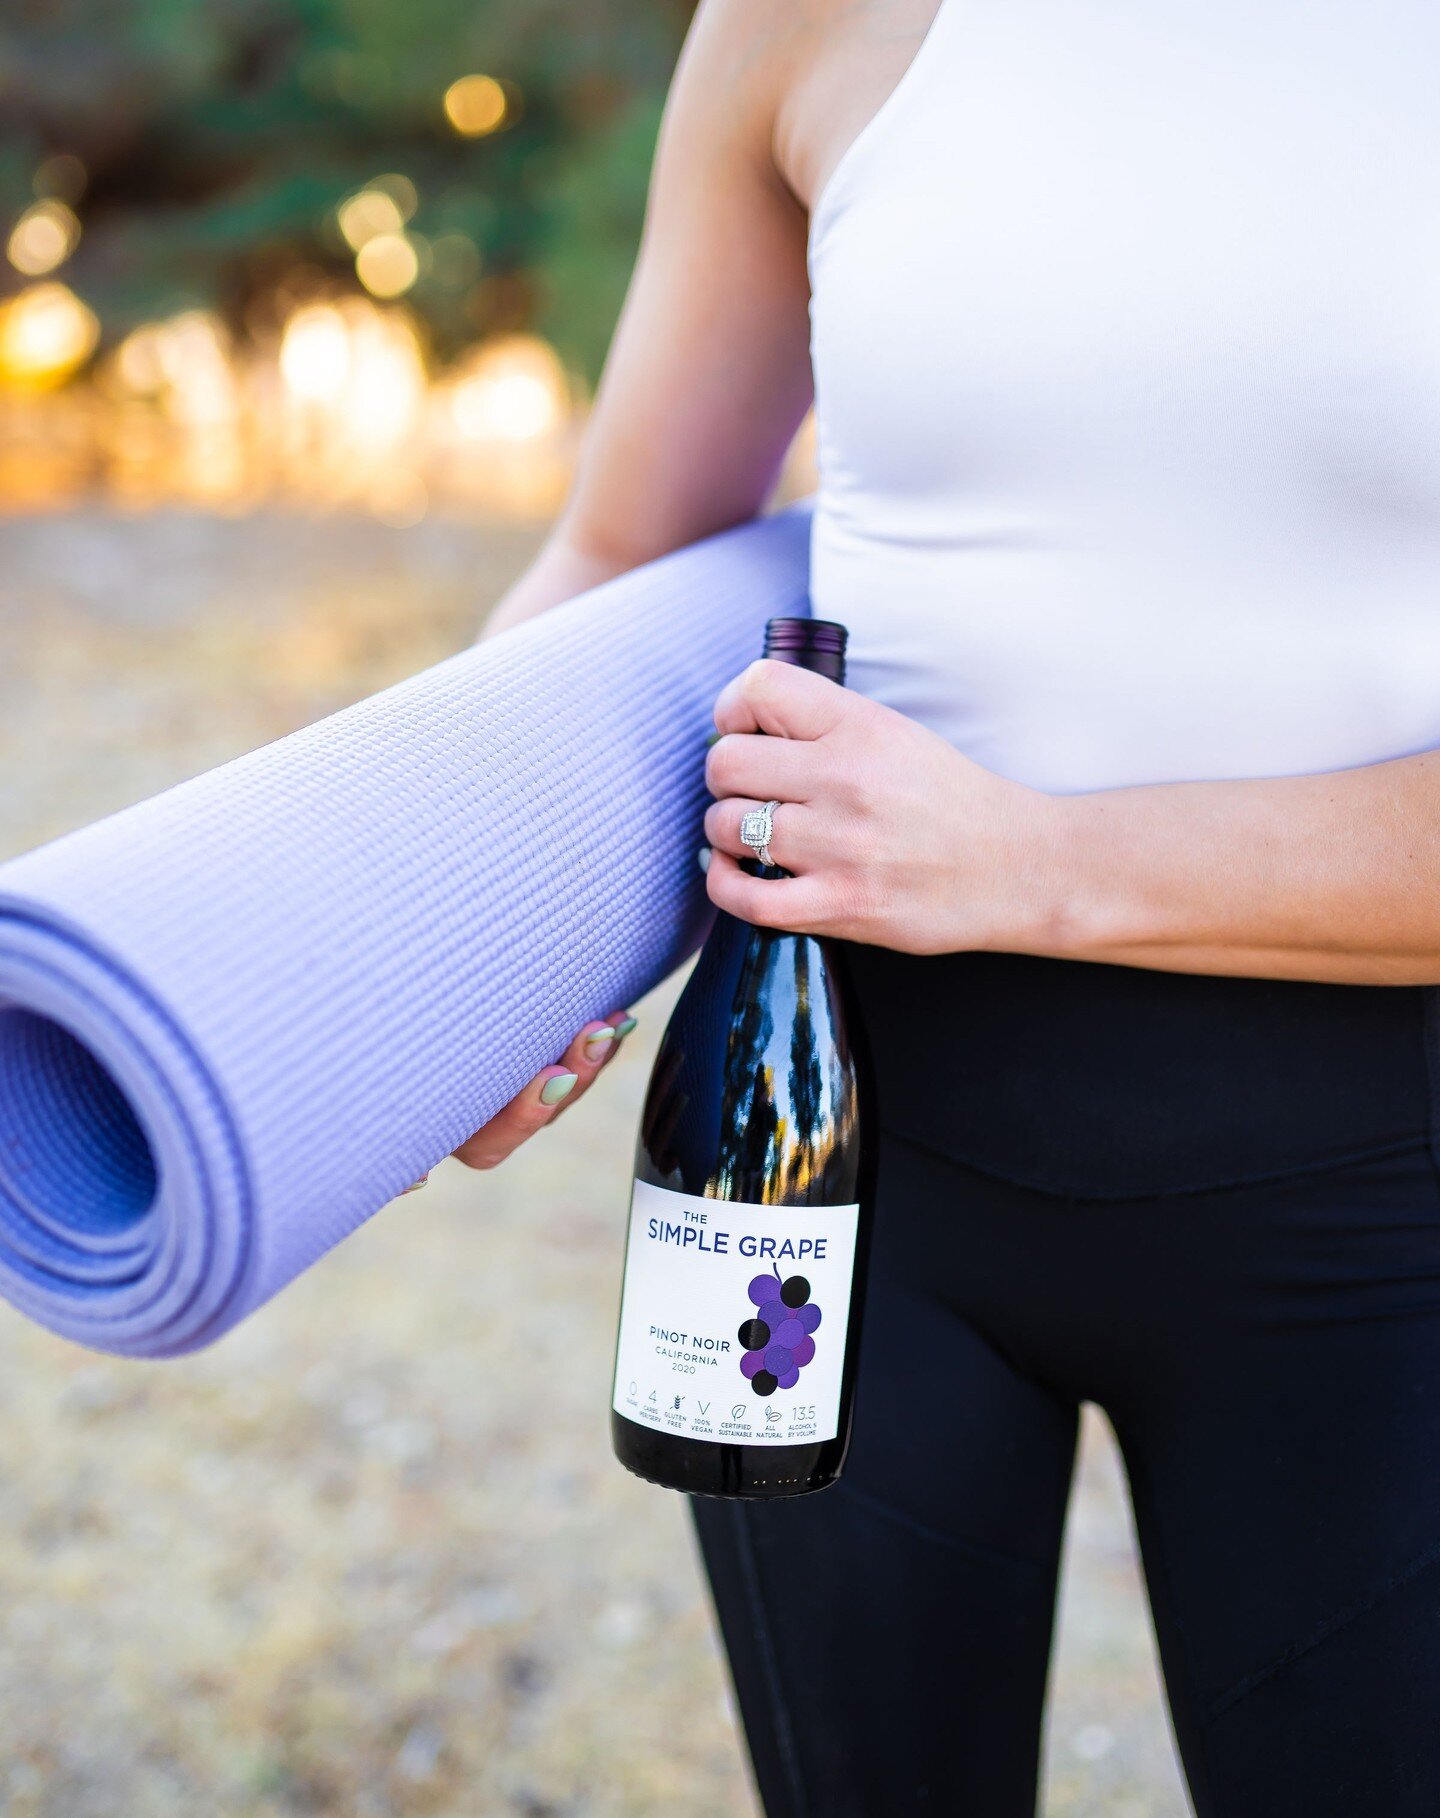 Saturdays call for a Simple Grape &quot;stretch and sip&quot; at the park 🧘.